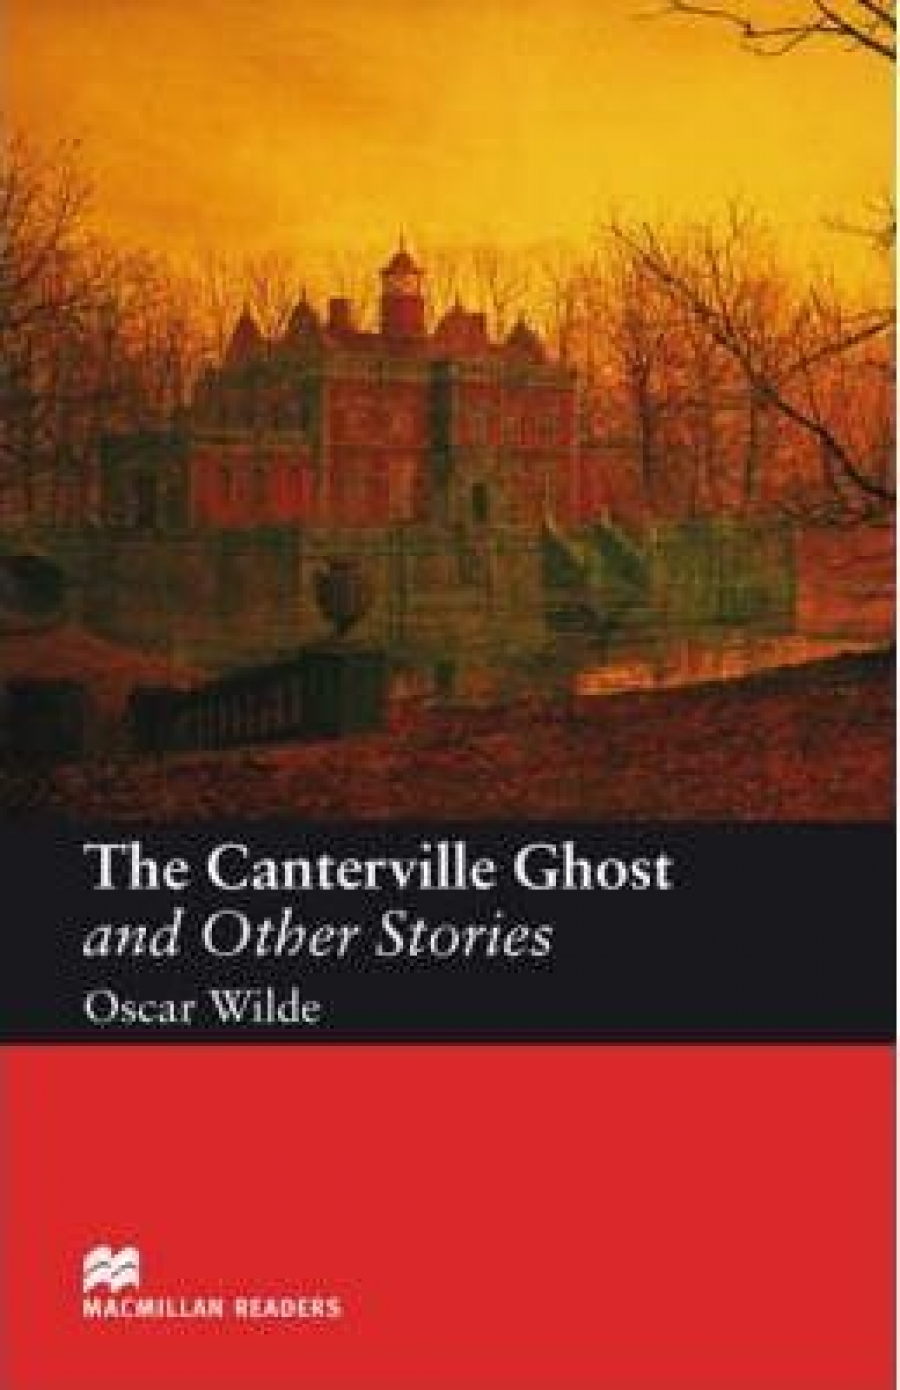 Oscar Wilde, retold by Stephen Colbourn The Canterville Ghost and Other Stories 